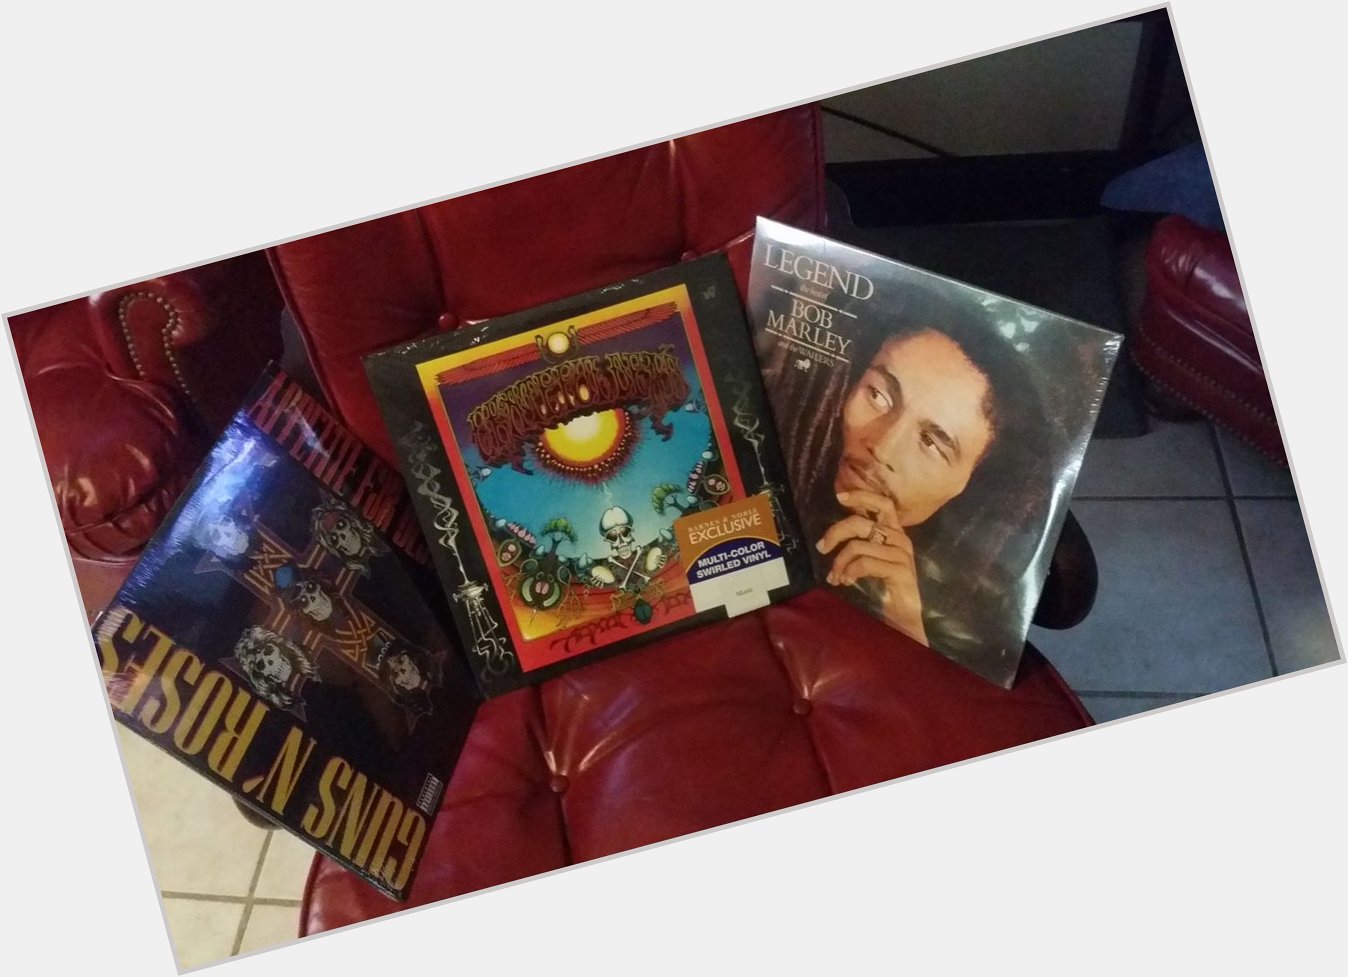 Happy birthday to me. GnR appetite for destruction, grateful dead aoxomoxoa, the best of Bob Marley 